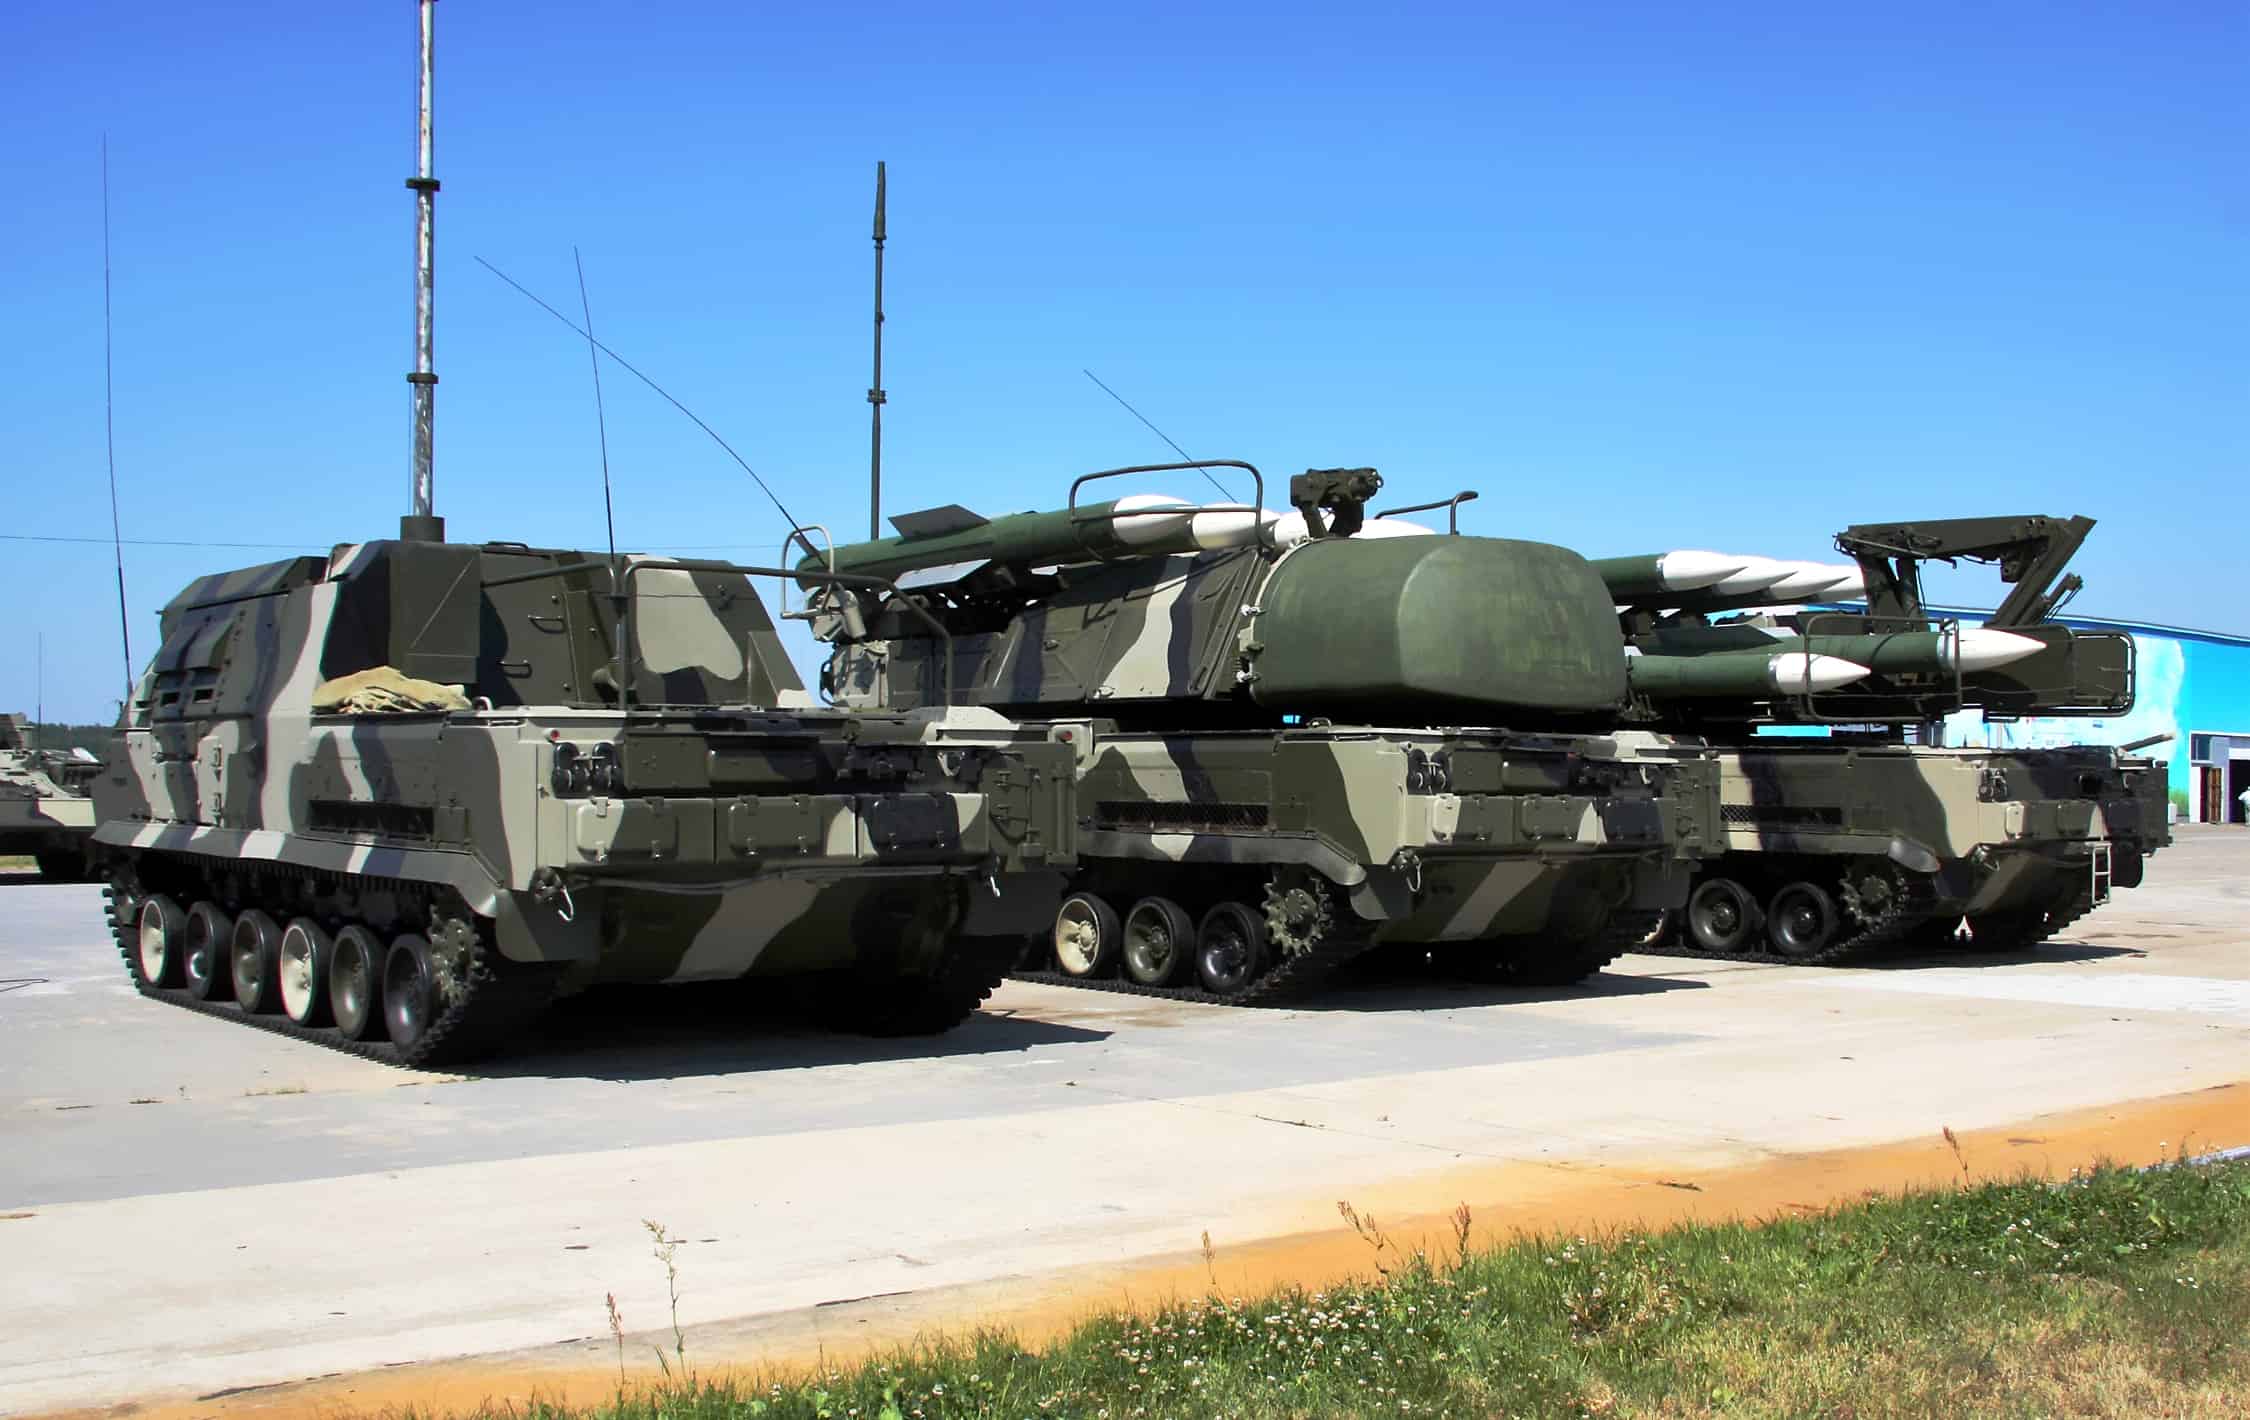 Buk-M1-2 air defence system in 2010 by Vitaly V. Kuzmin